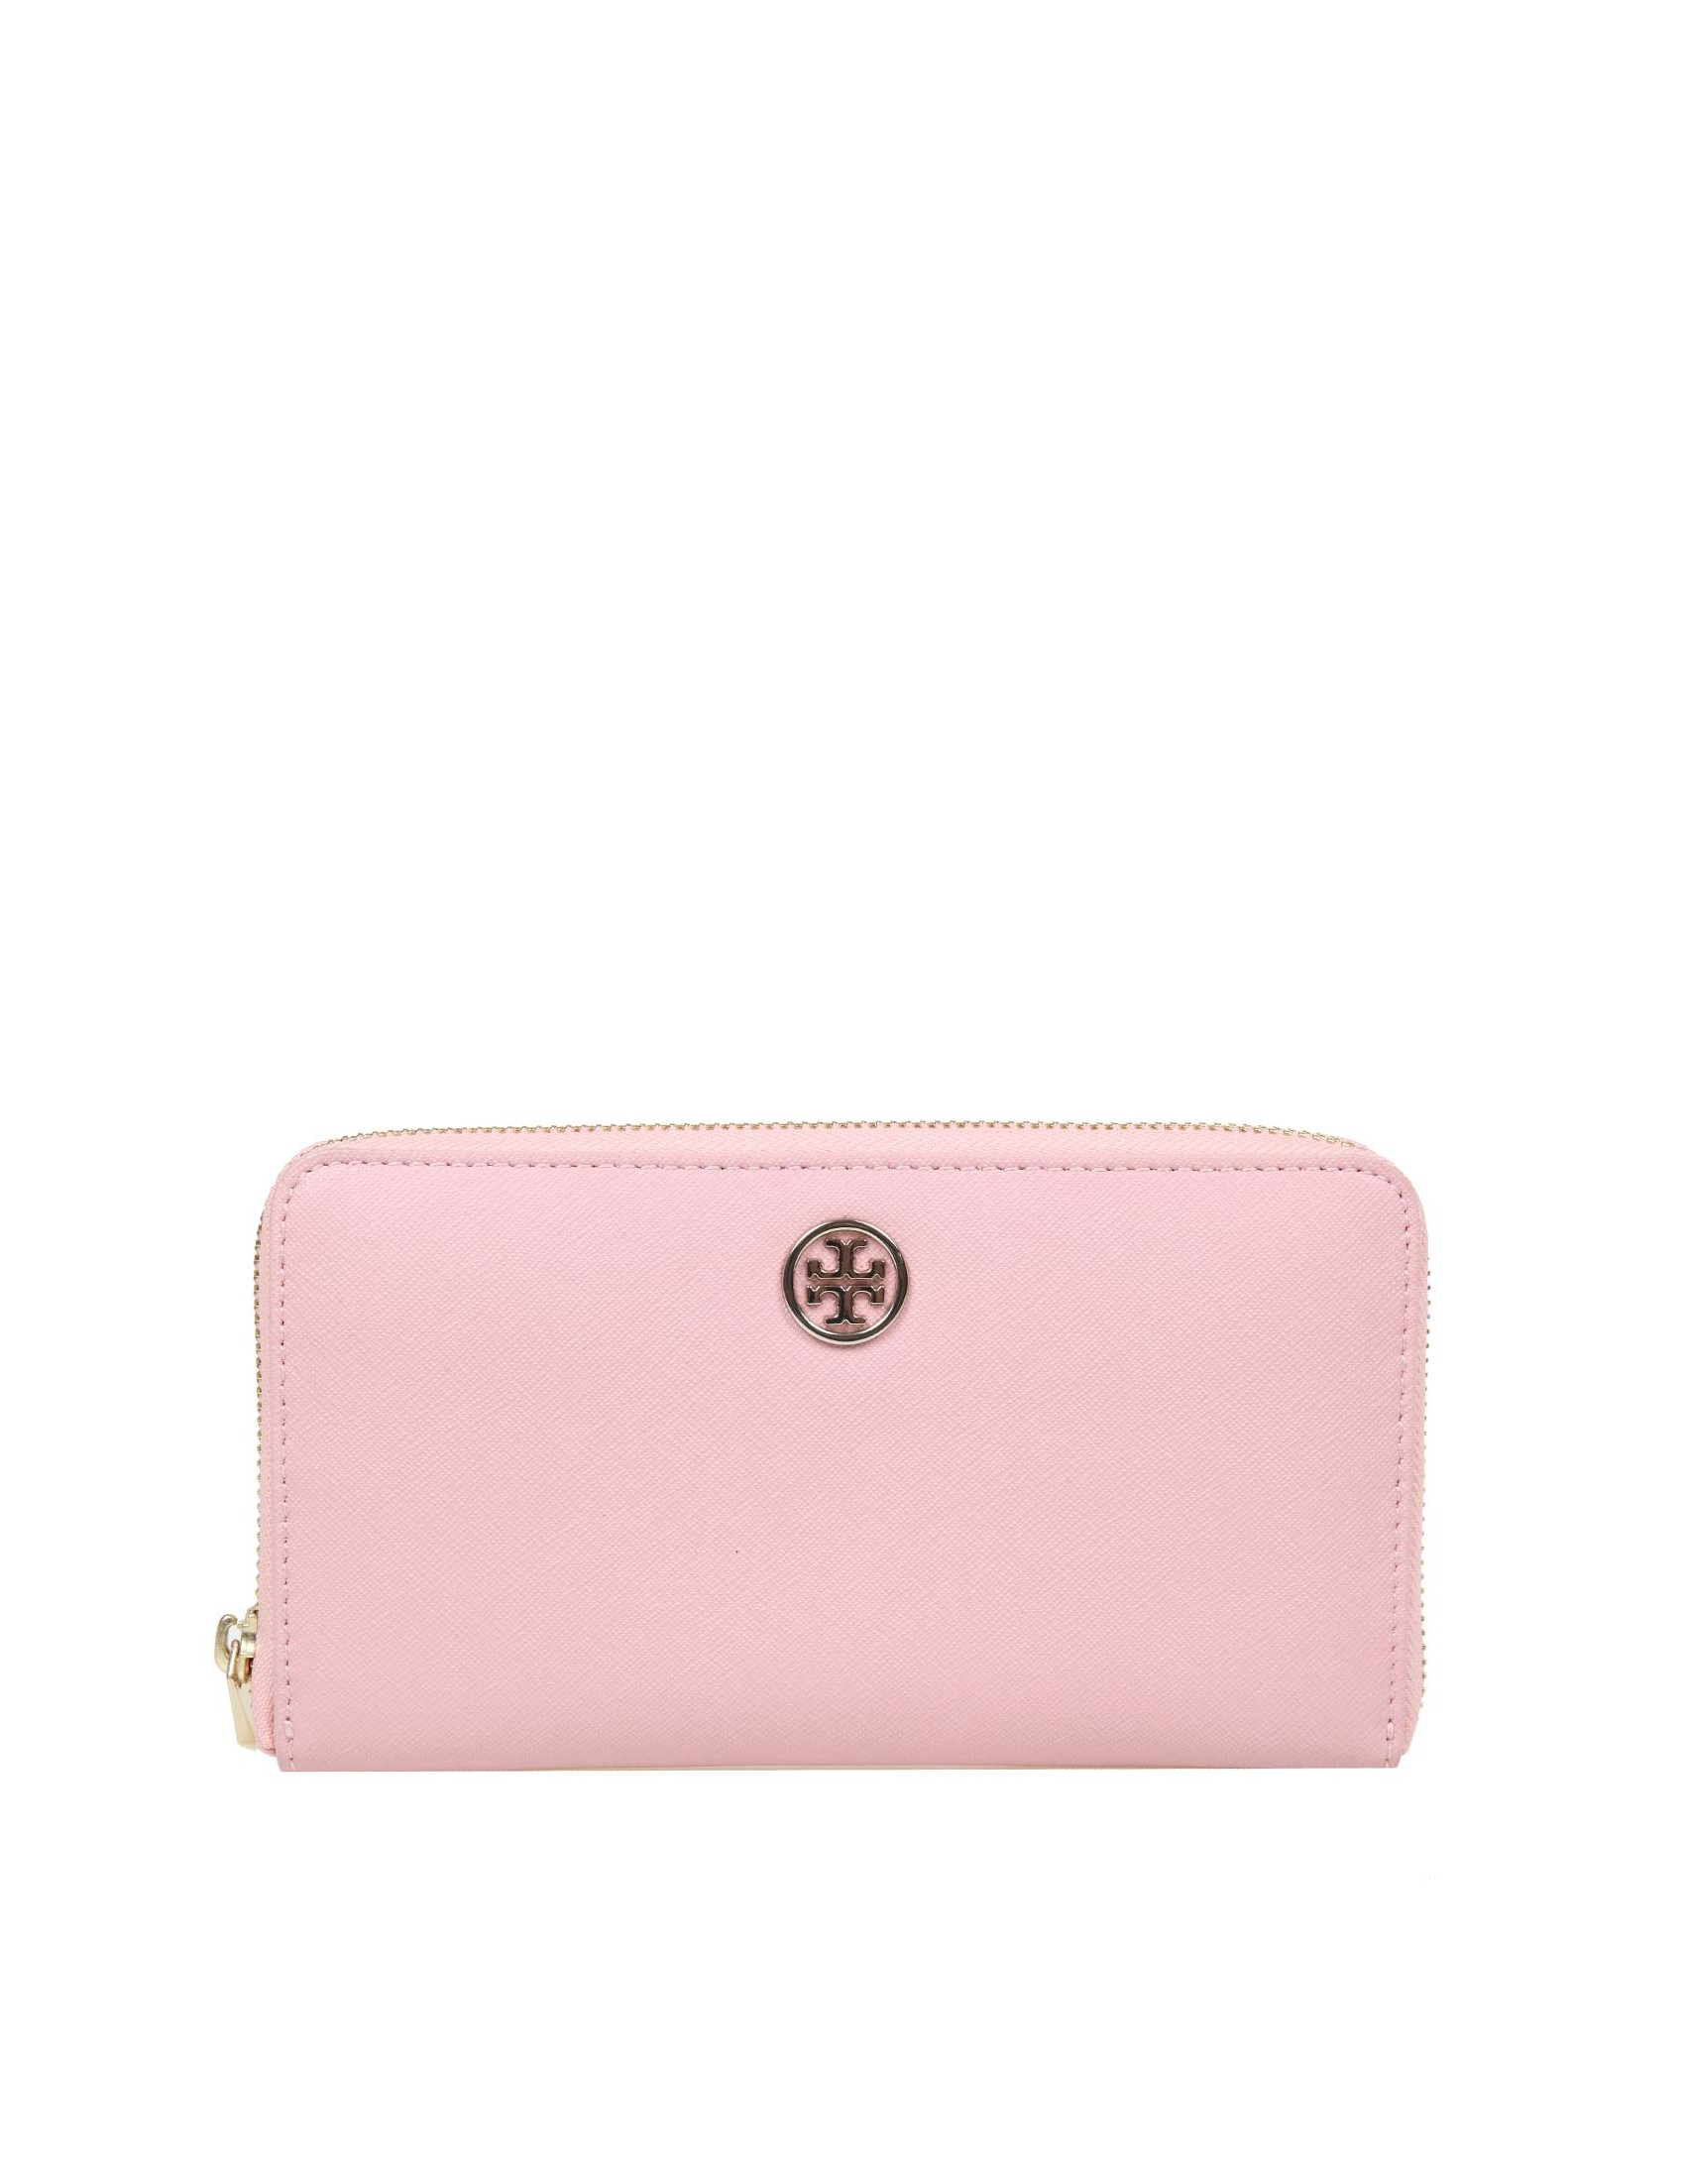 TORY BURCH ROBINSON WALLET IN PINK COLOR LEATHER